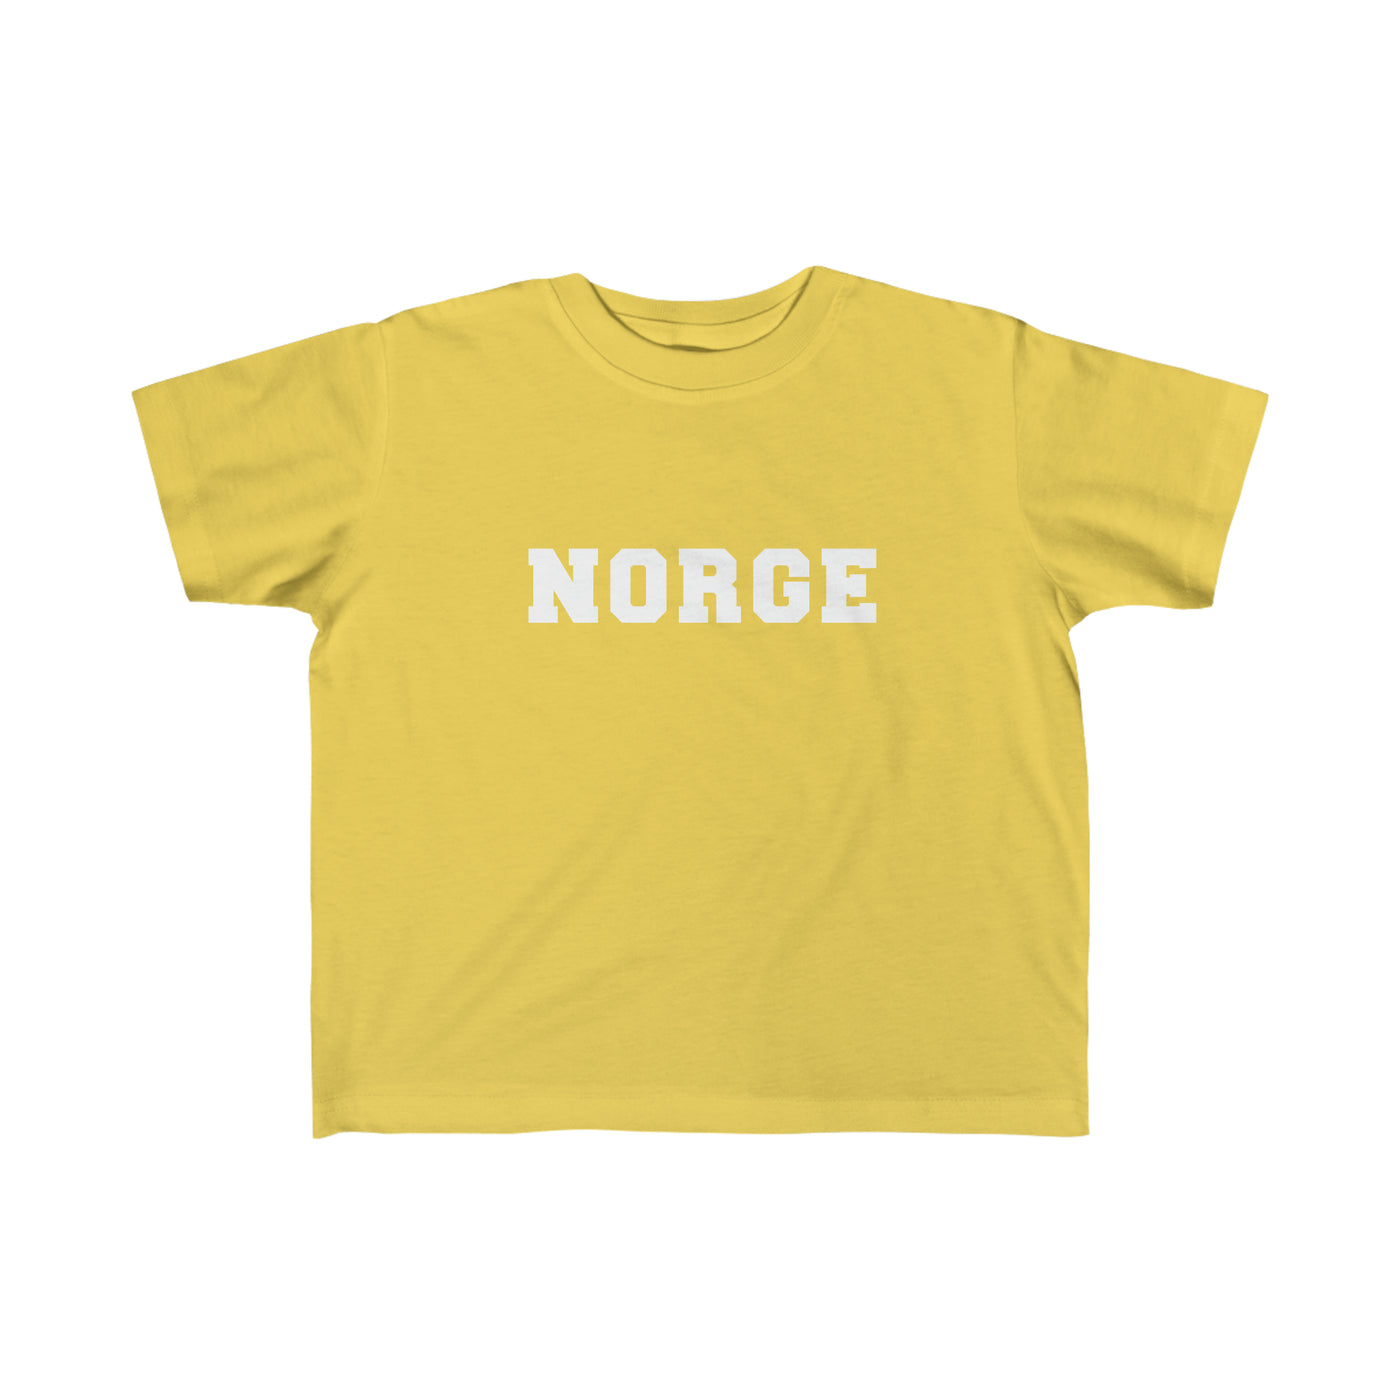 Norge Toddler Tee